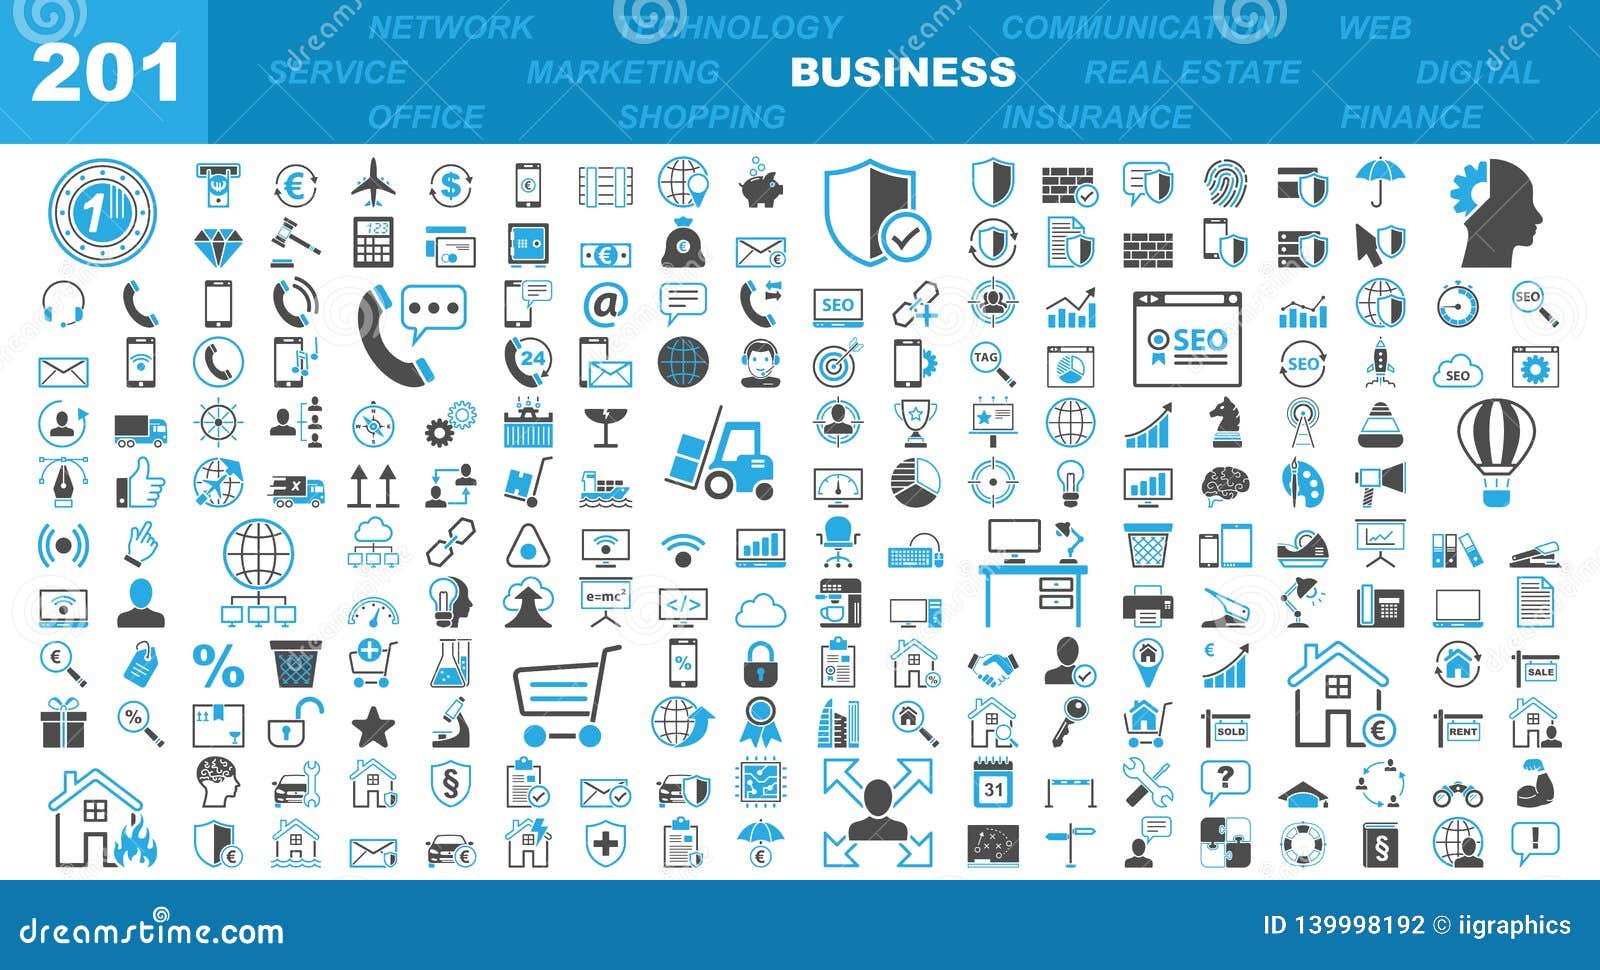 business & office icons - 201 iconset